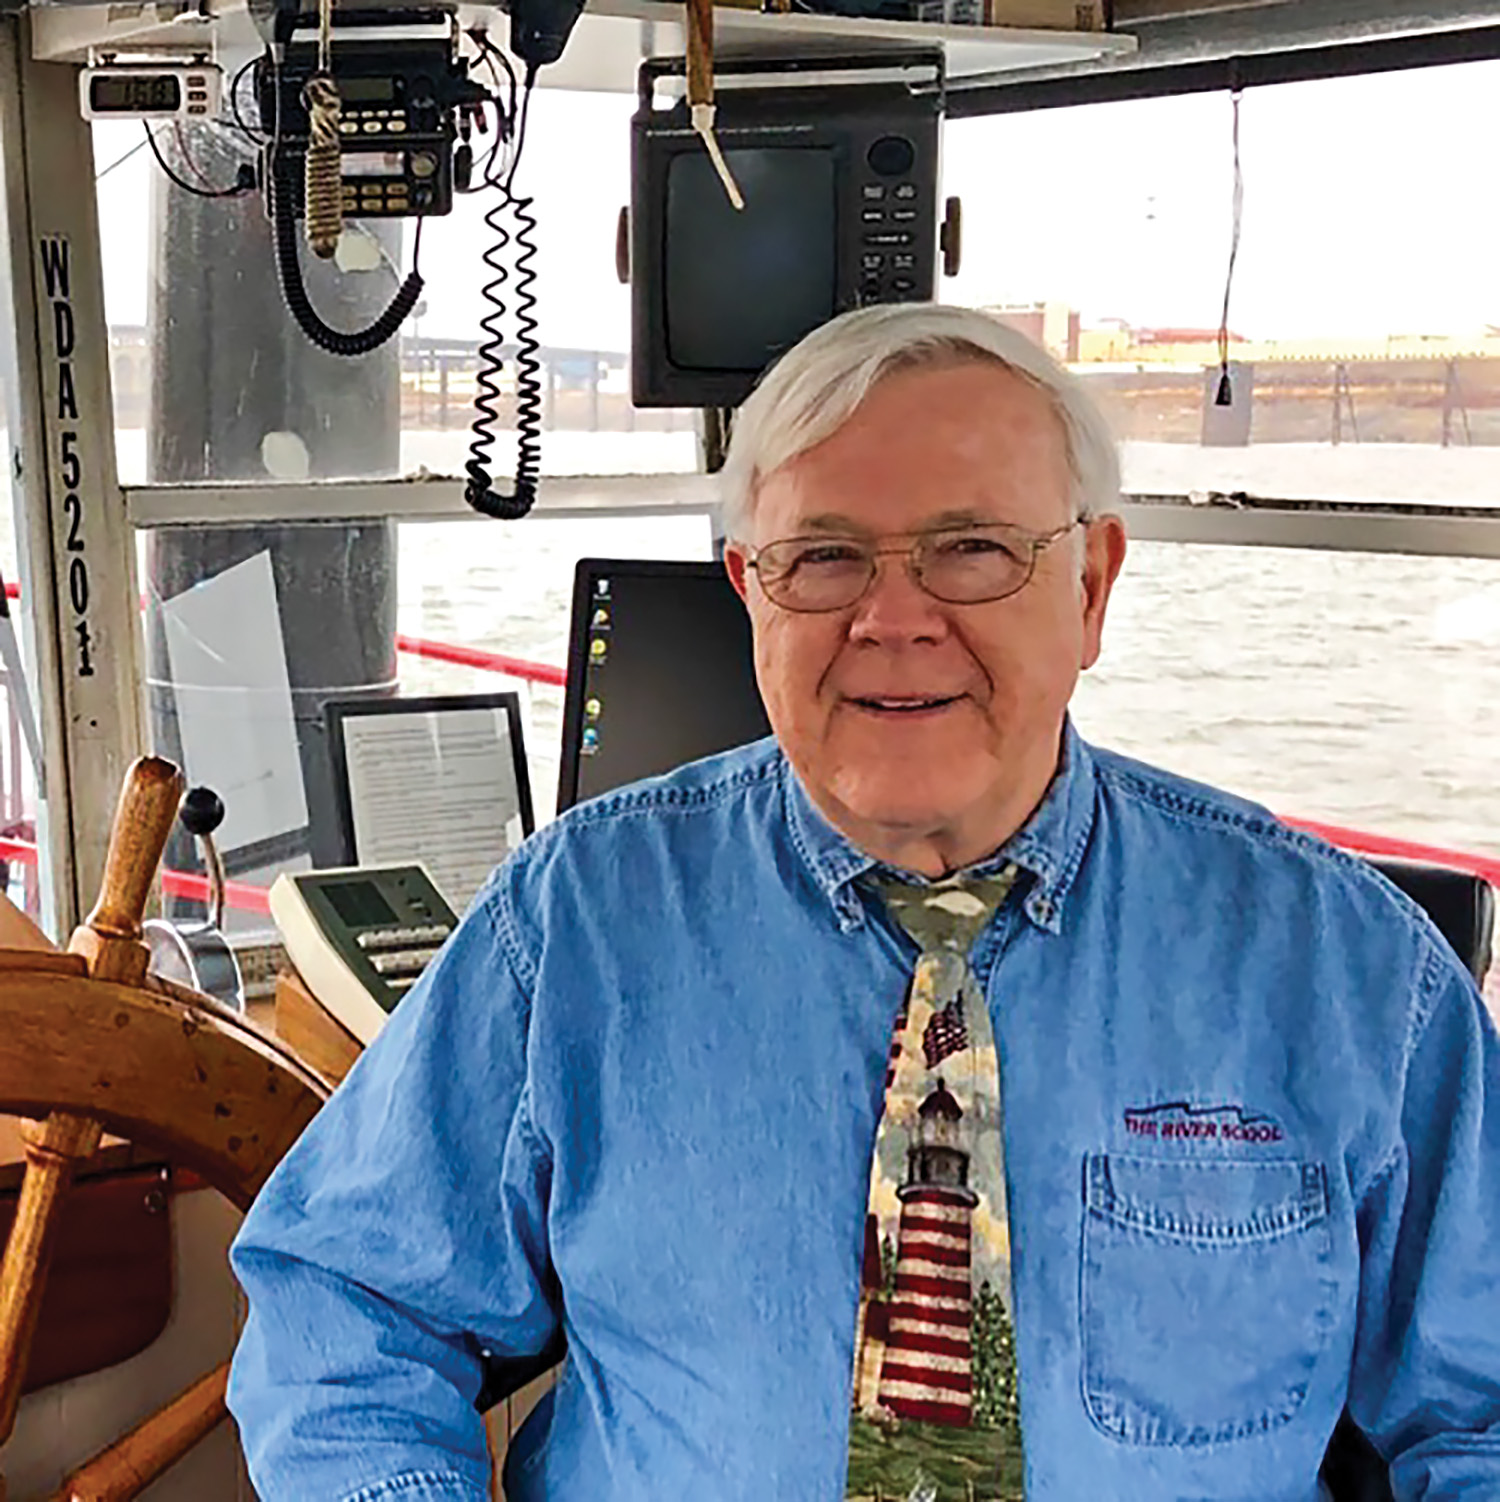 Bill Kline has dedicated his life to both blue and brown waters. The former Coast Guardsman now owns The River School, where he and his staff help train and prepare mariners for licensing, Subchapter M and other facets of the industry.